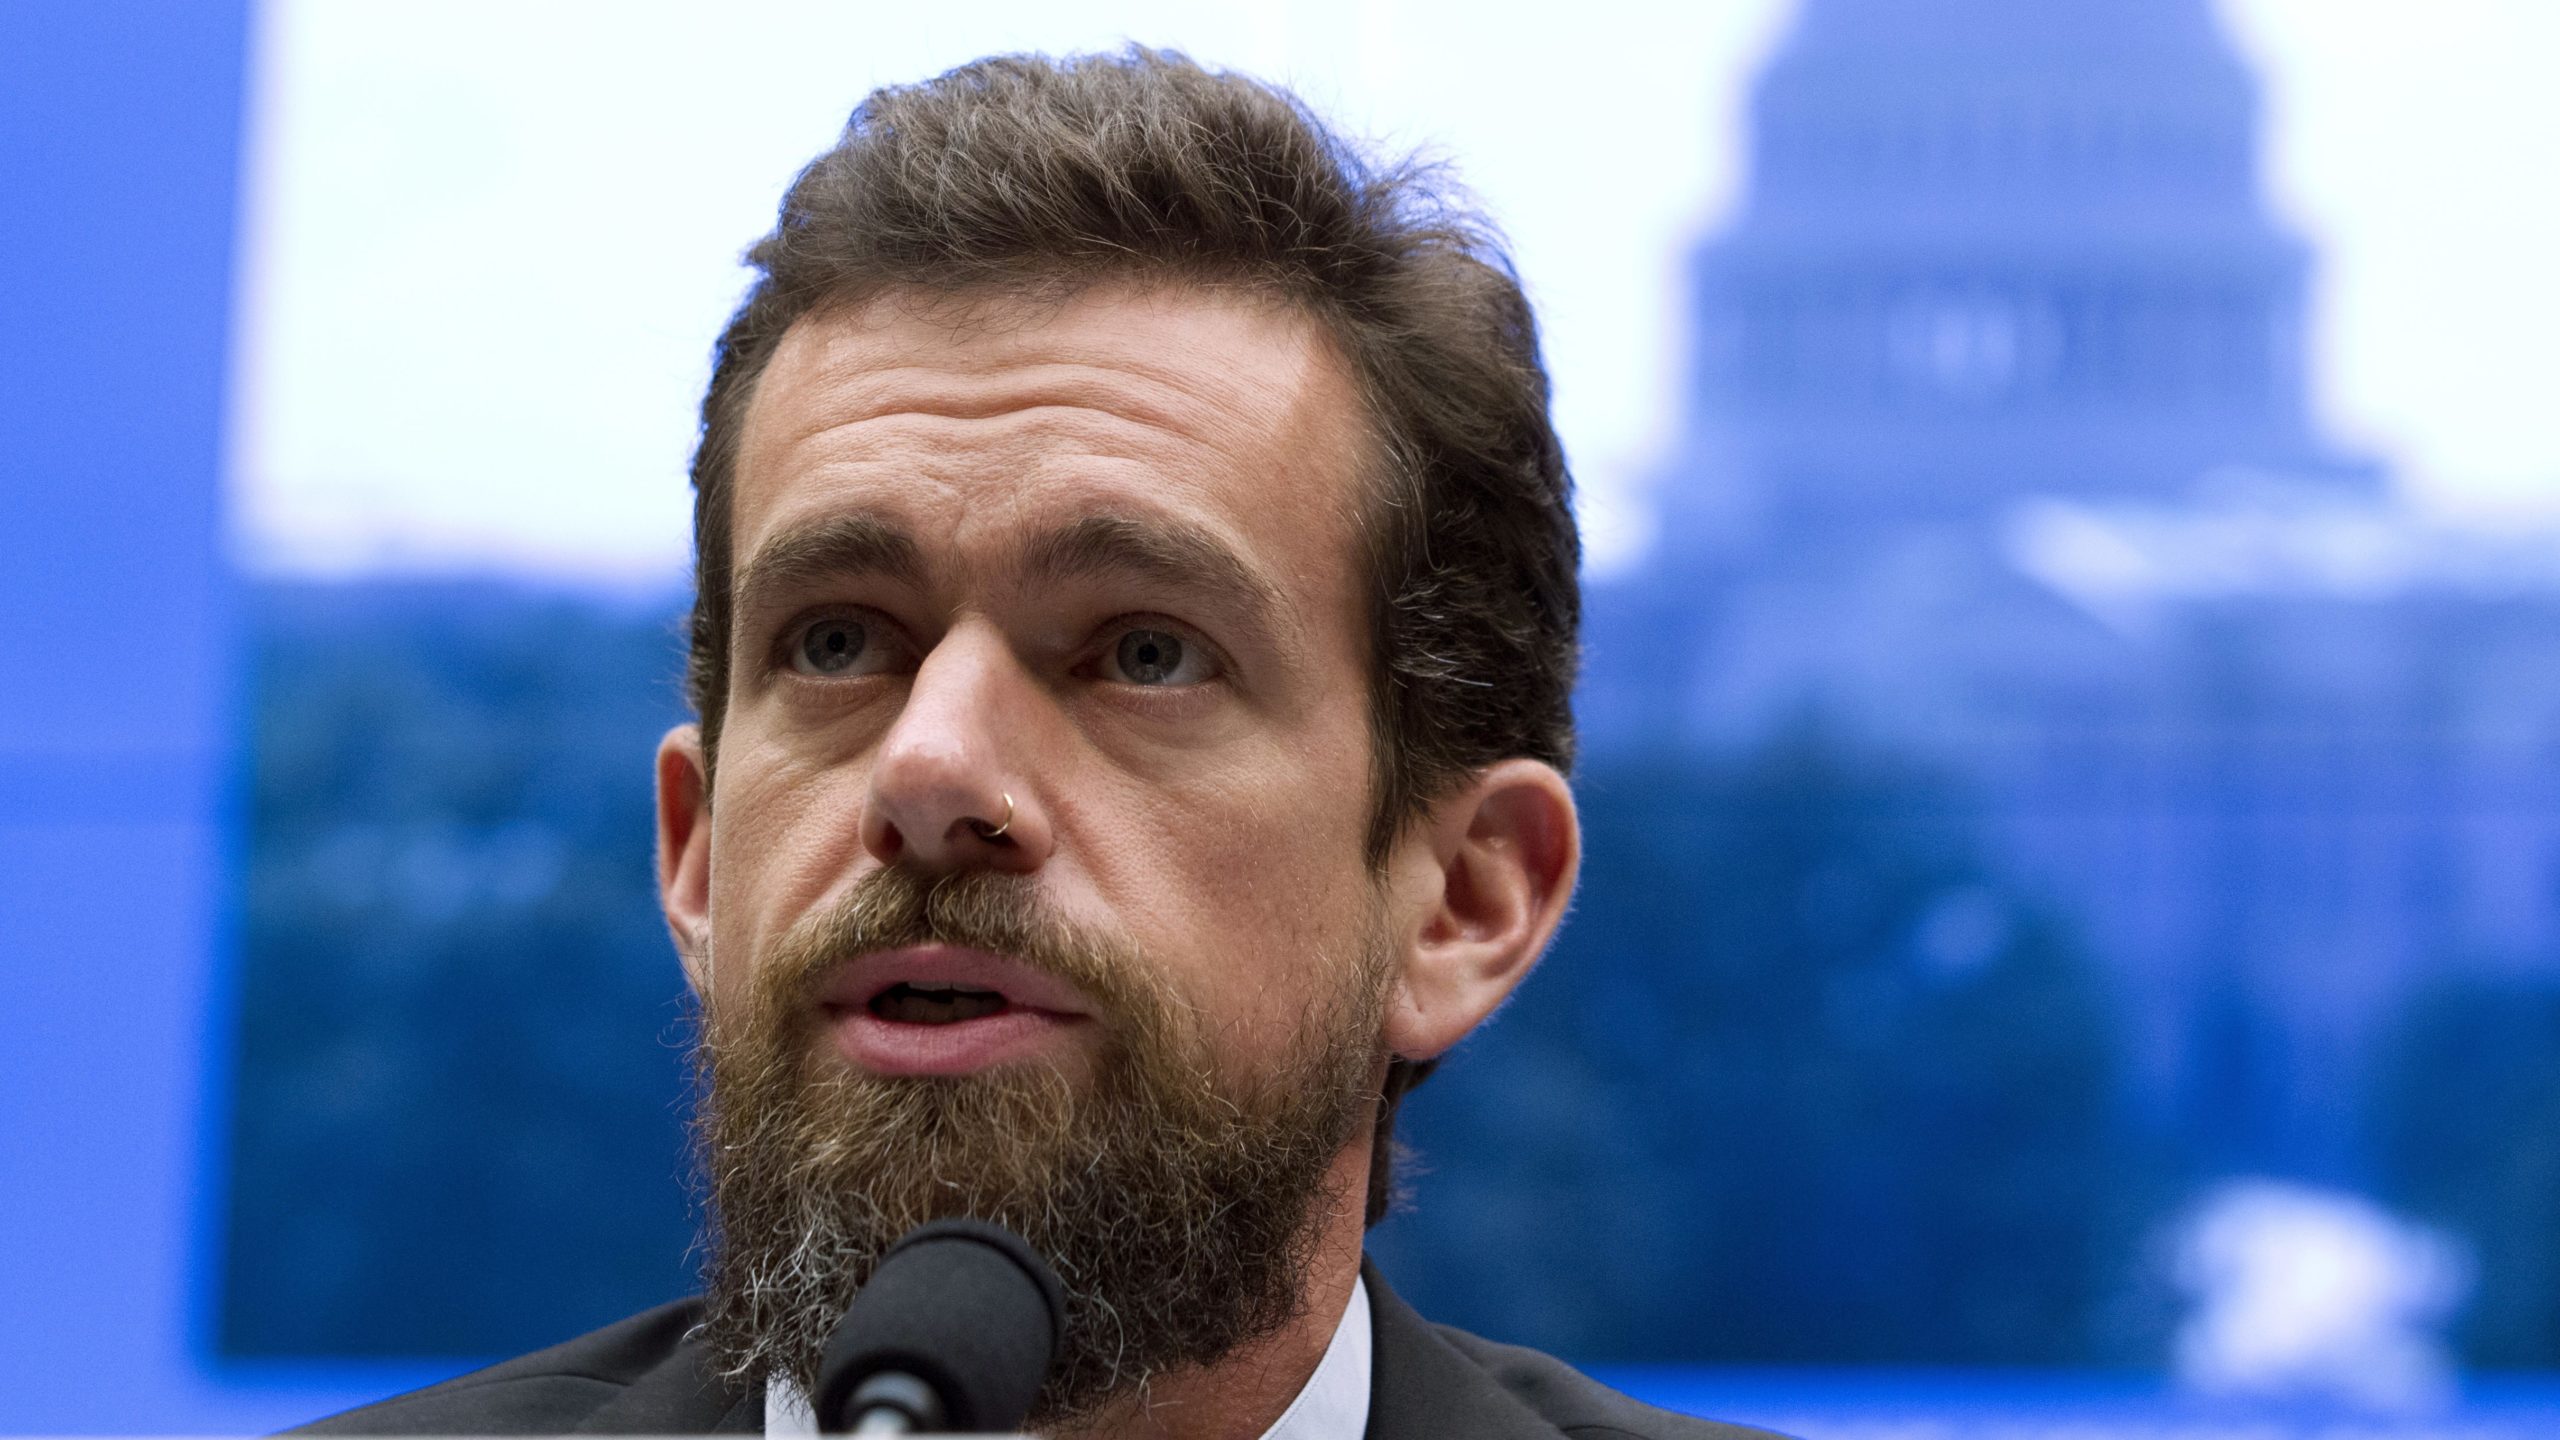 Breaking: Jack Dorsey To Resign As Twitter CEO